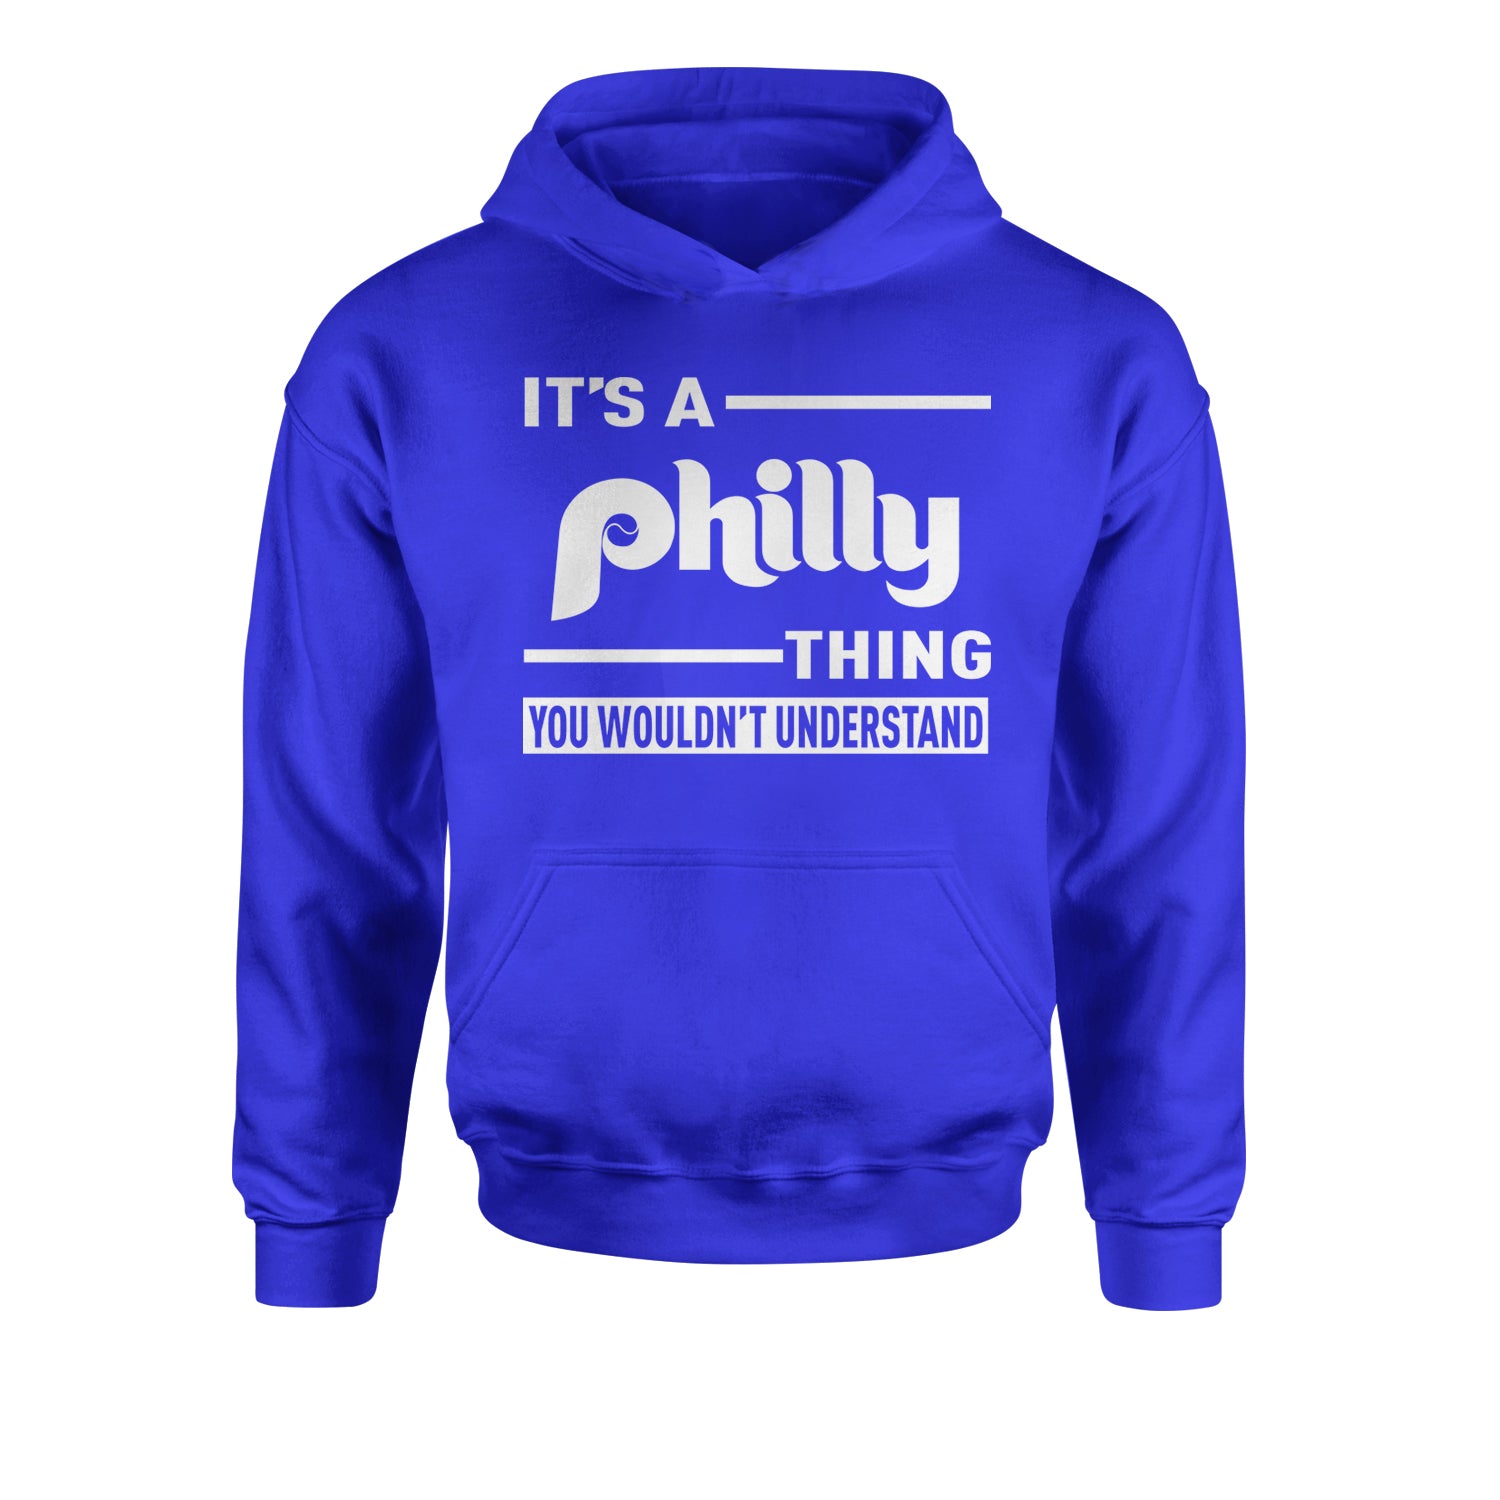 It's A Philly Thing, You Wouldn't Understand Youth-Sized Hoodie baseball, filly, football, jawn, morgan, Philadelphia, philli by Expression Tees